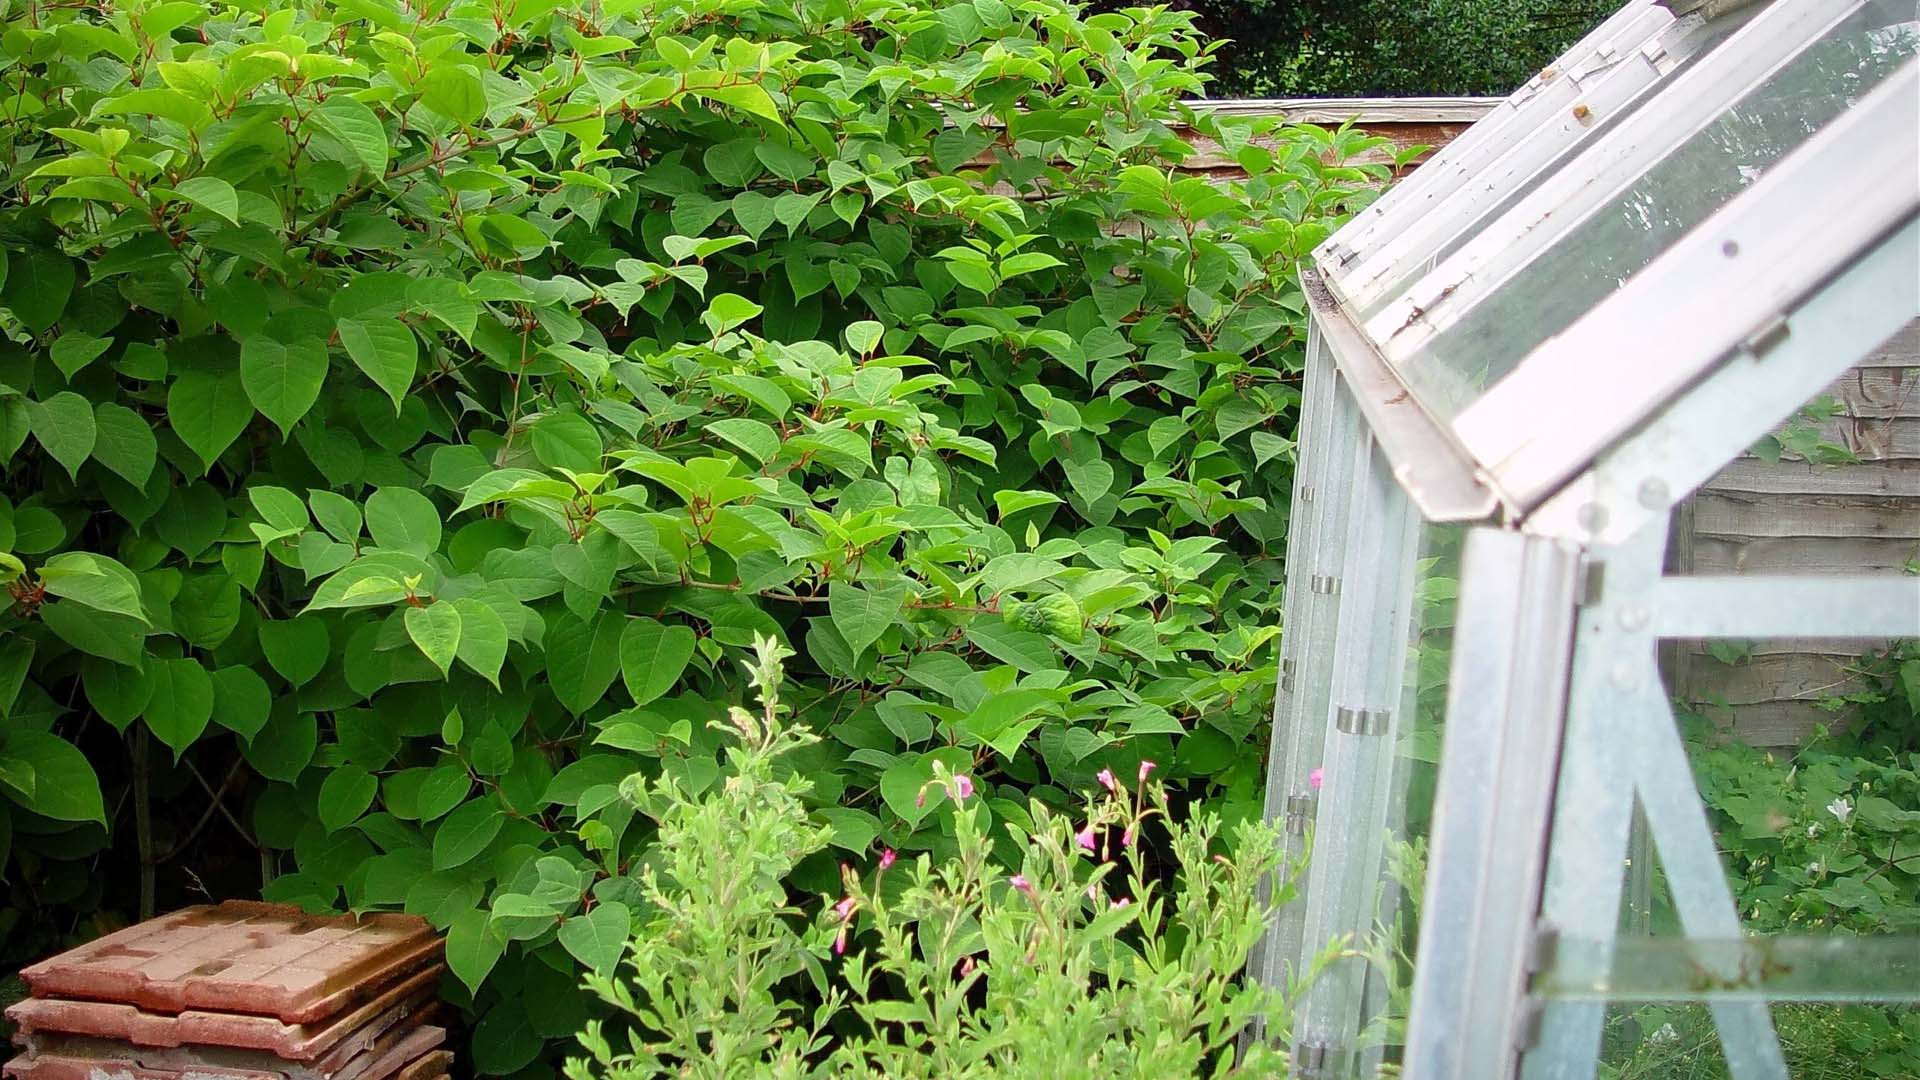 Japanese knotweed growing through fence and a greenhouse